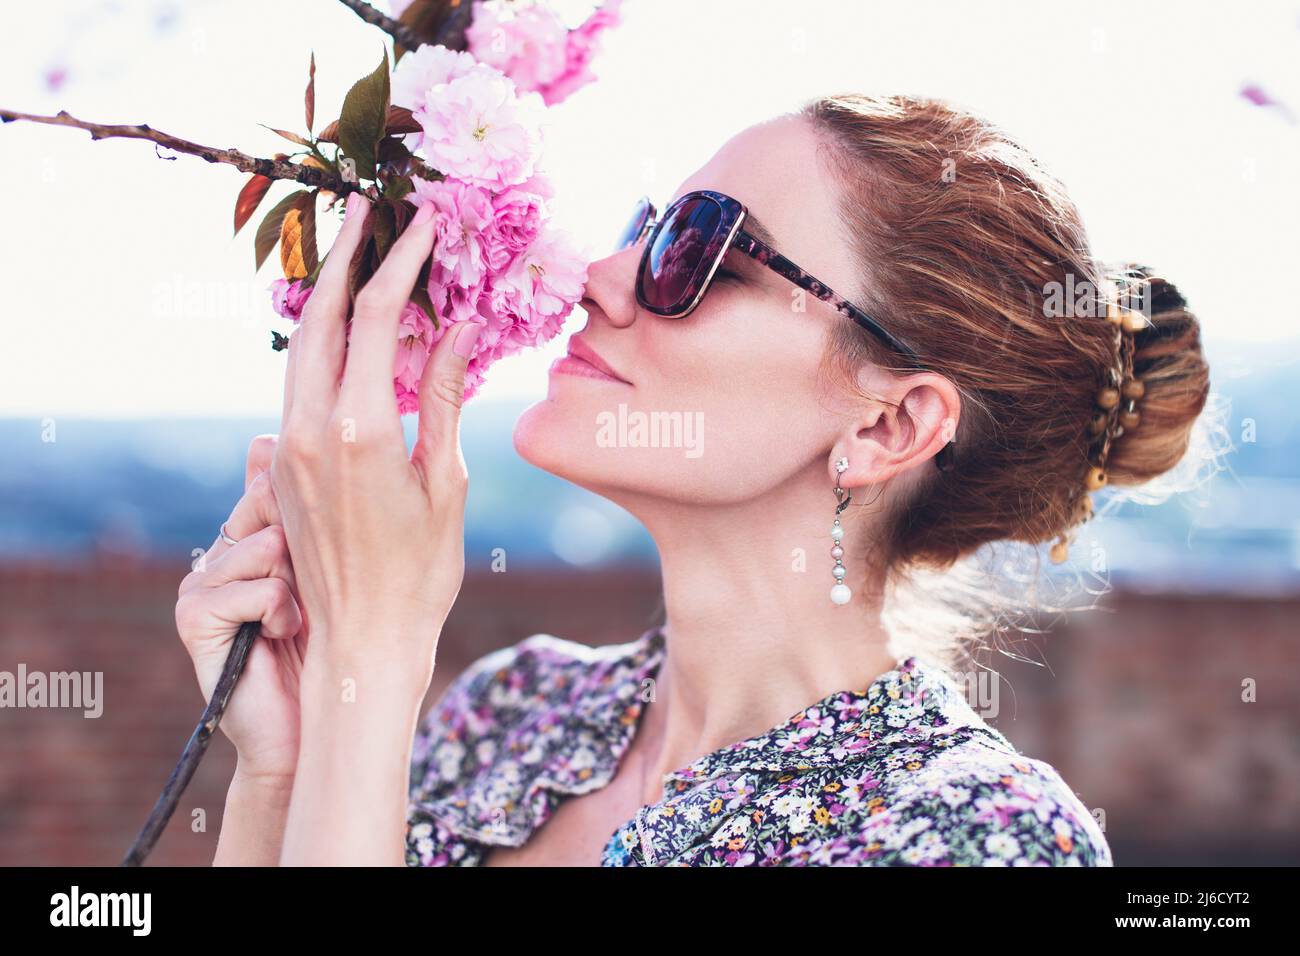 Young redhead woman smelling cherry blossom at springtime portrait Stock Photo